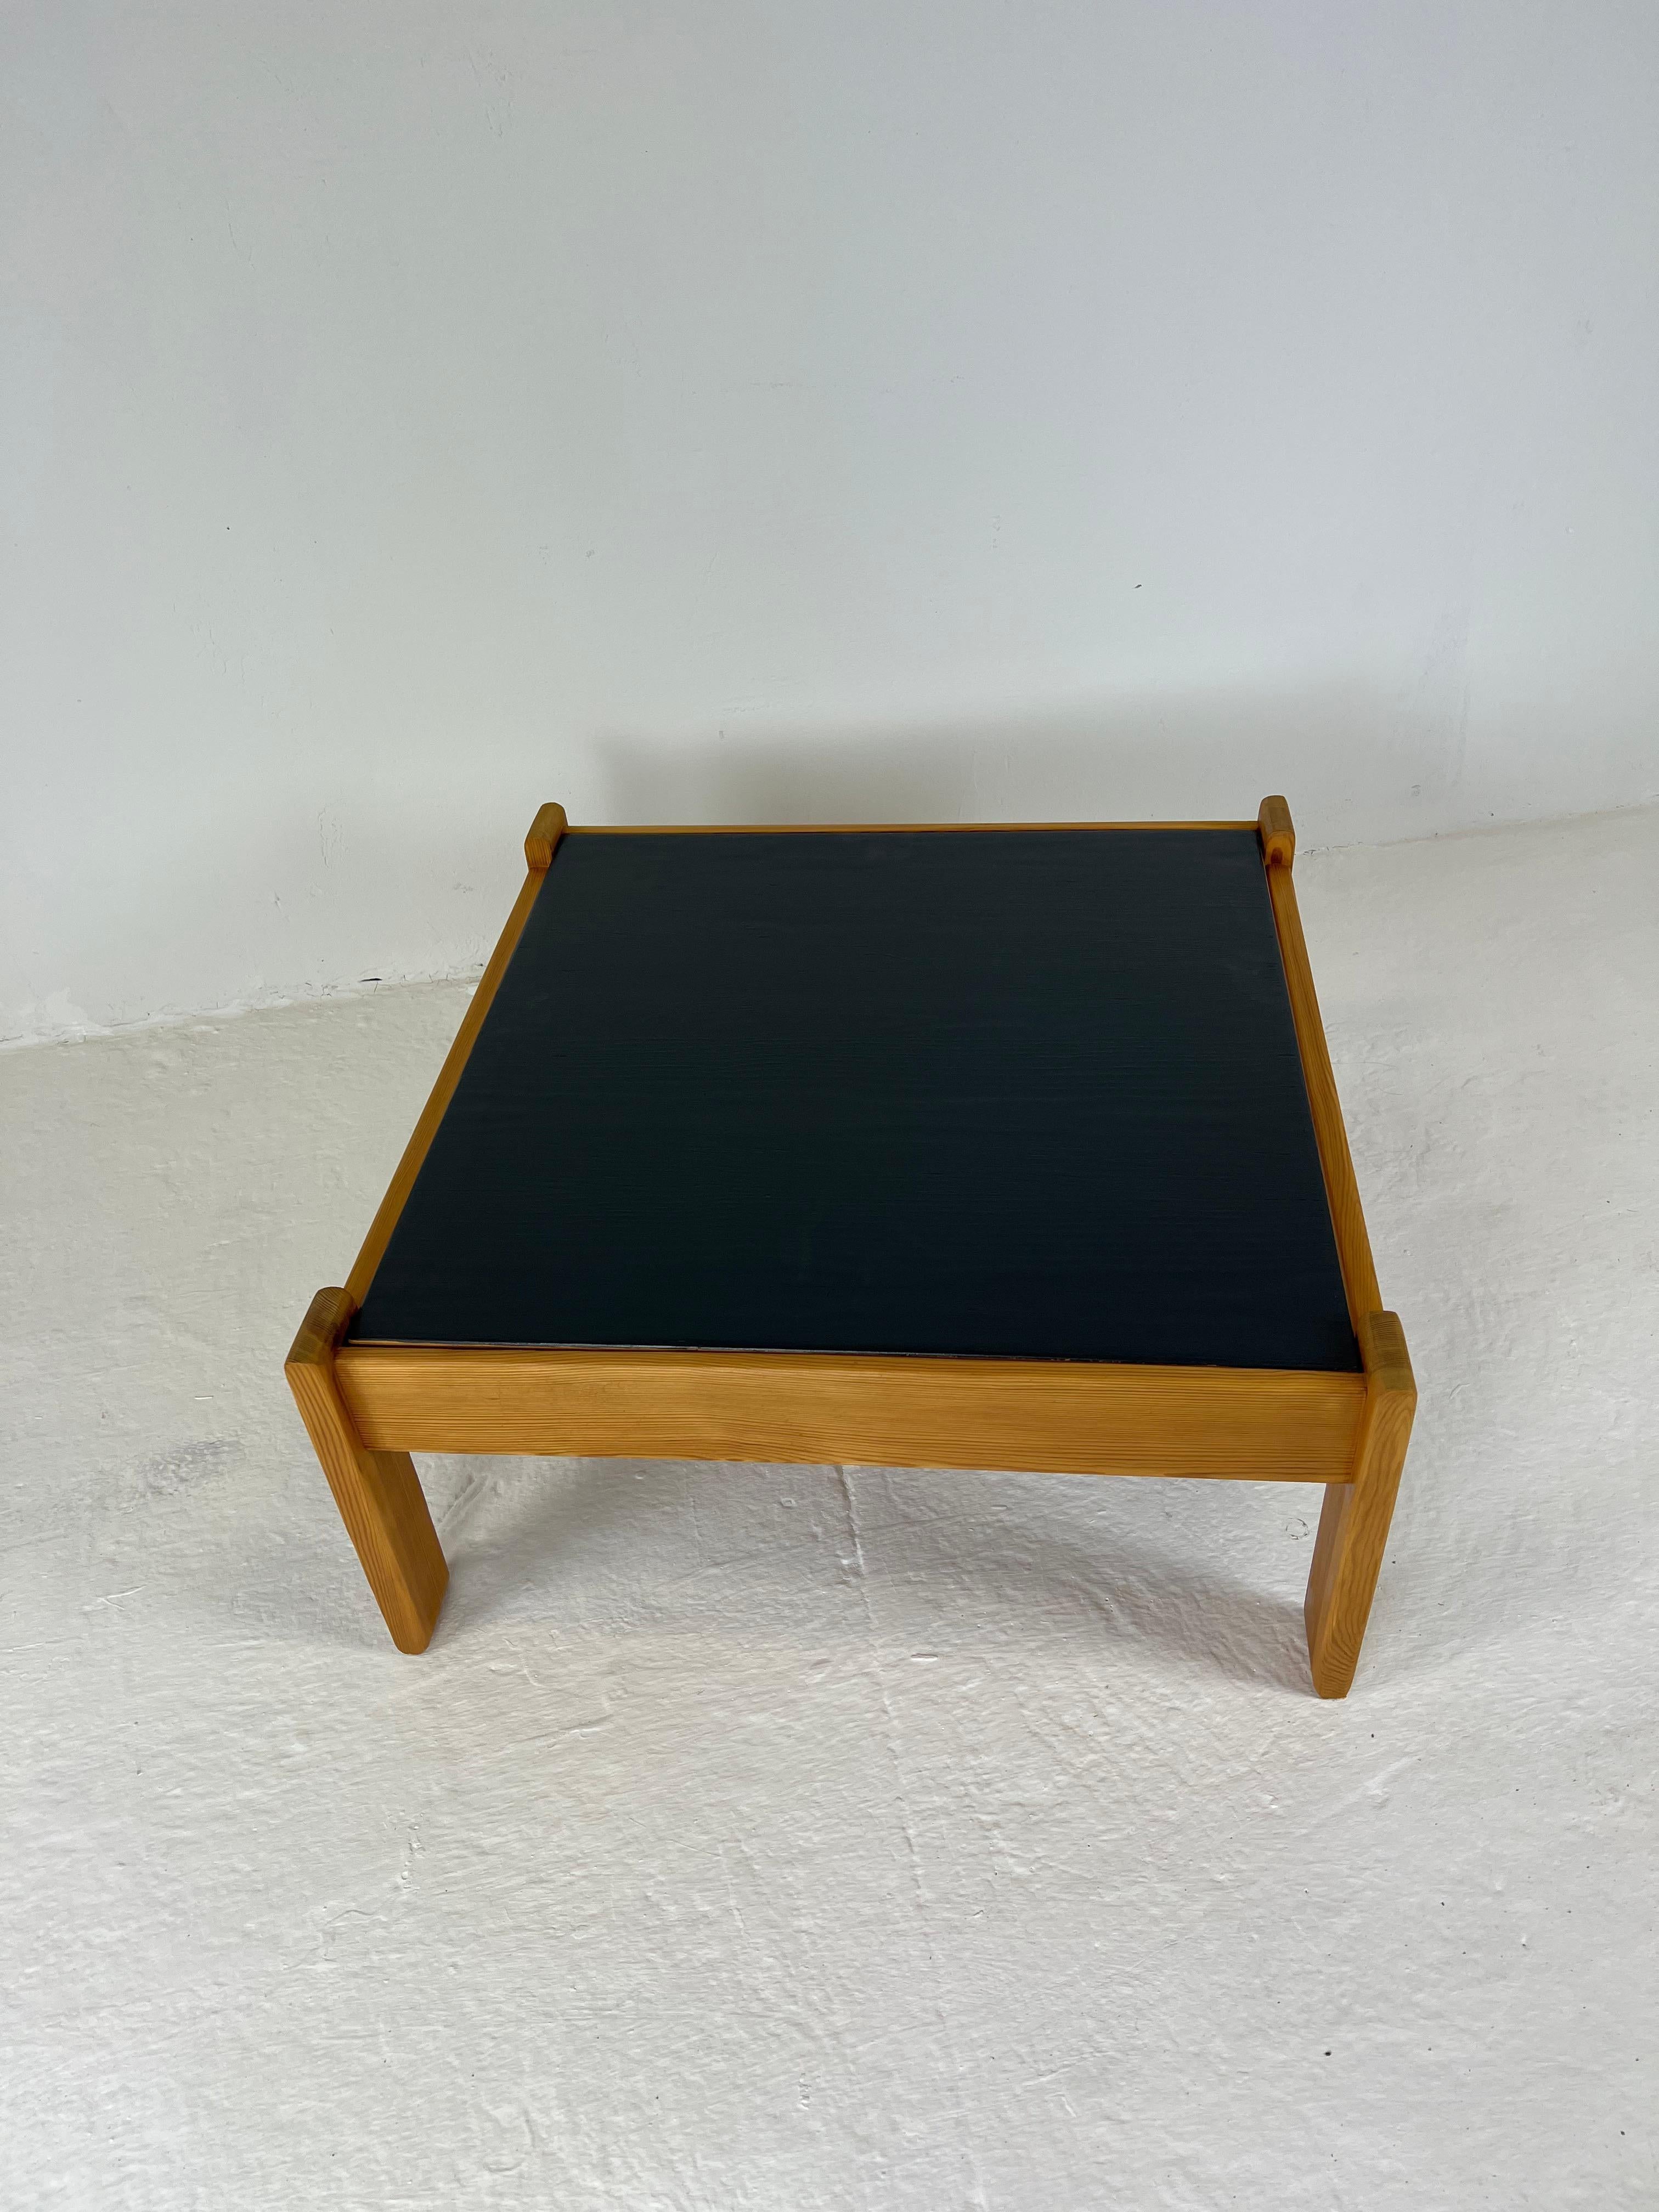 Two-Sided Modernist Coffee Table in Pine Wood, 1970s For Sale 6